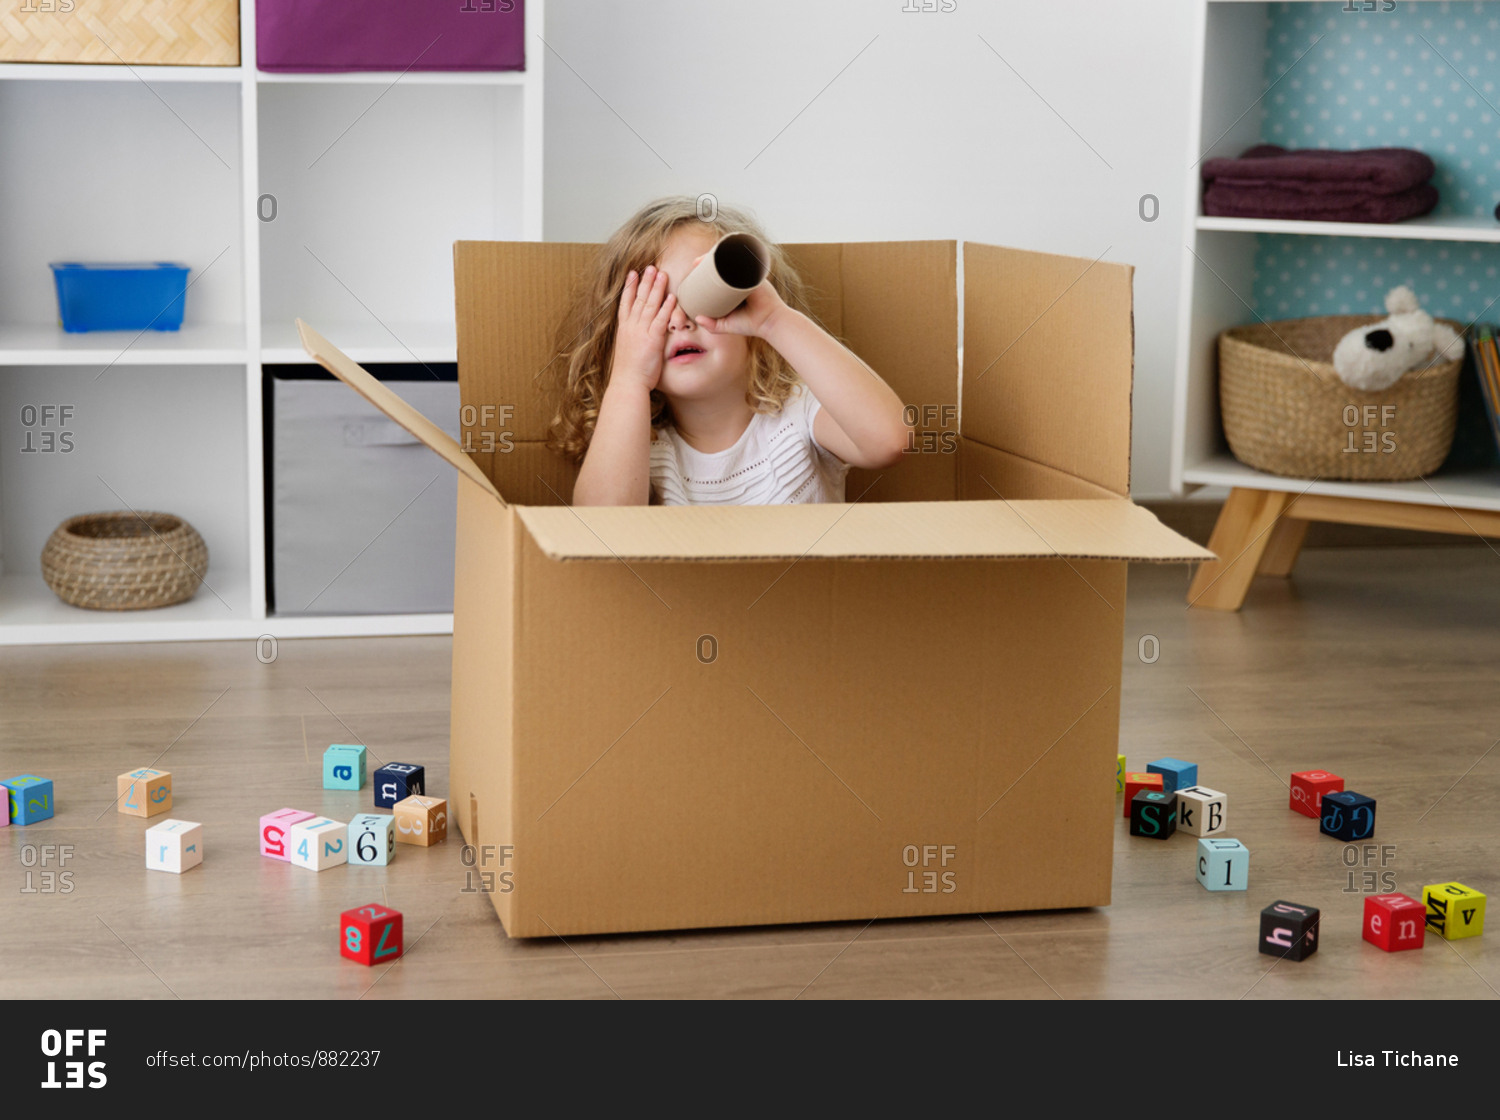 Playful girl looking through cardboard tube while sitting in box